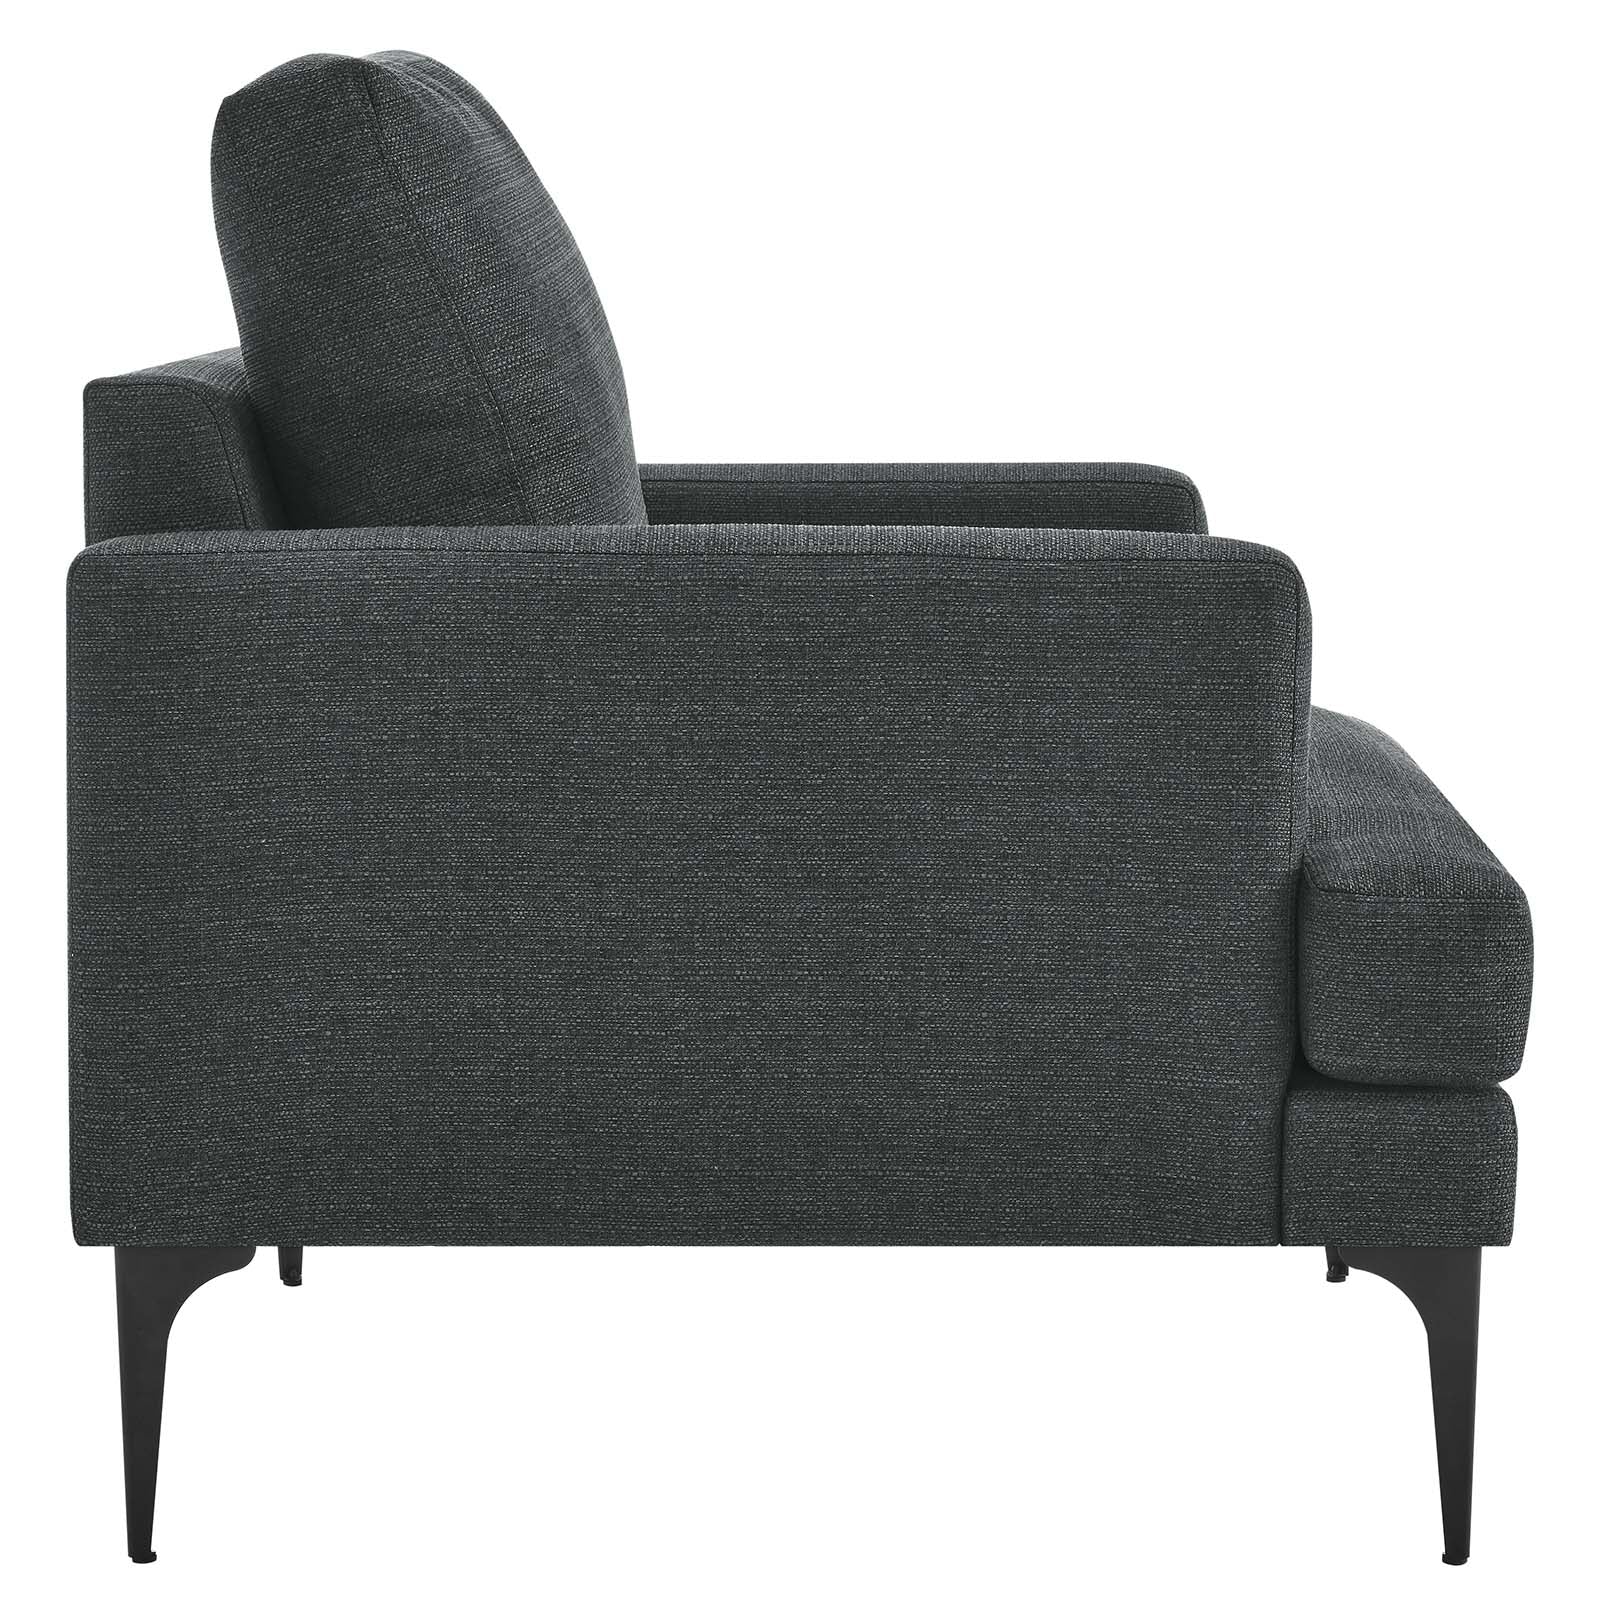 Evermore Upholstered Fabric Armchair - East Shore Modern Home Furnishings